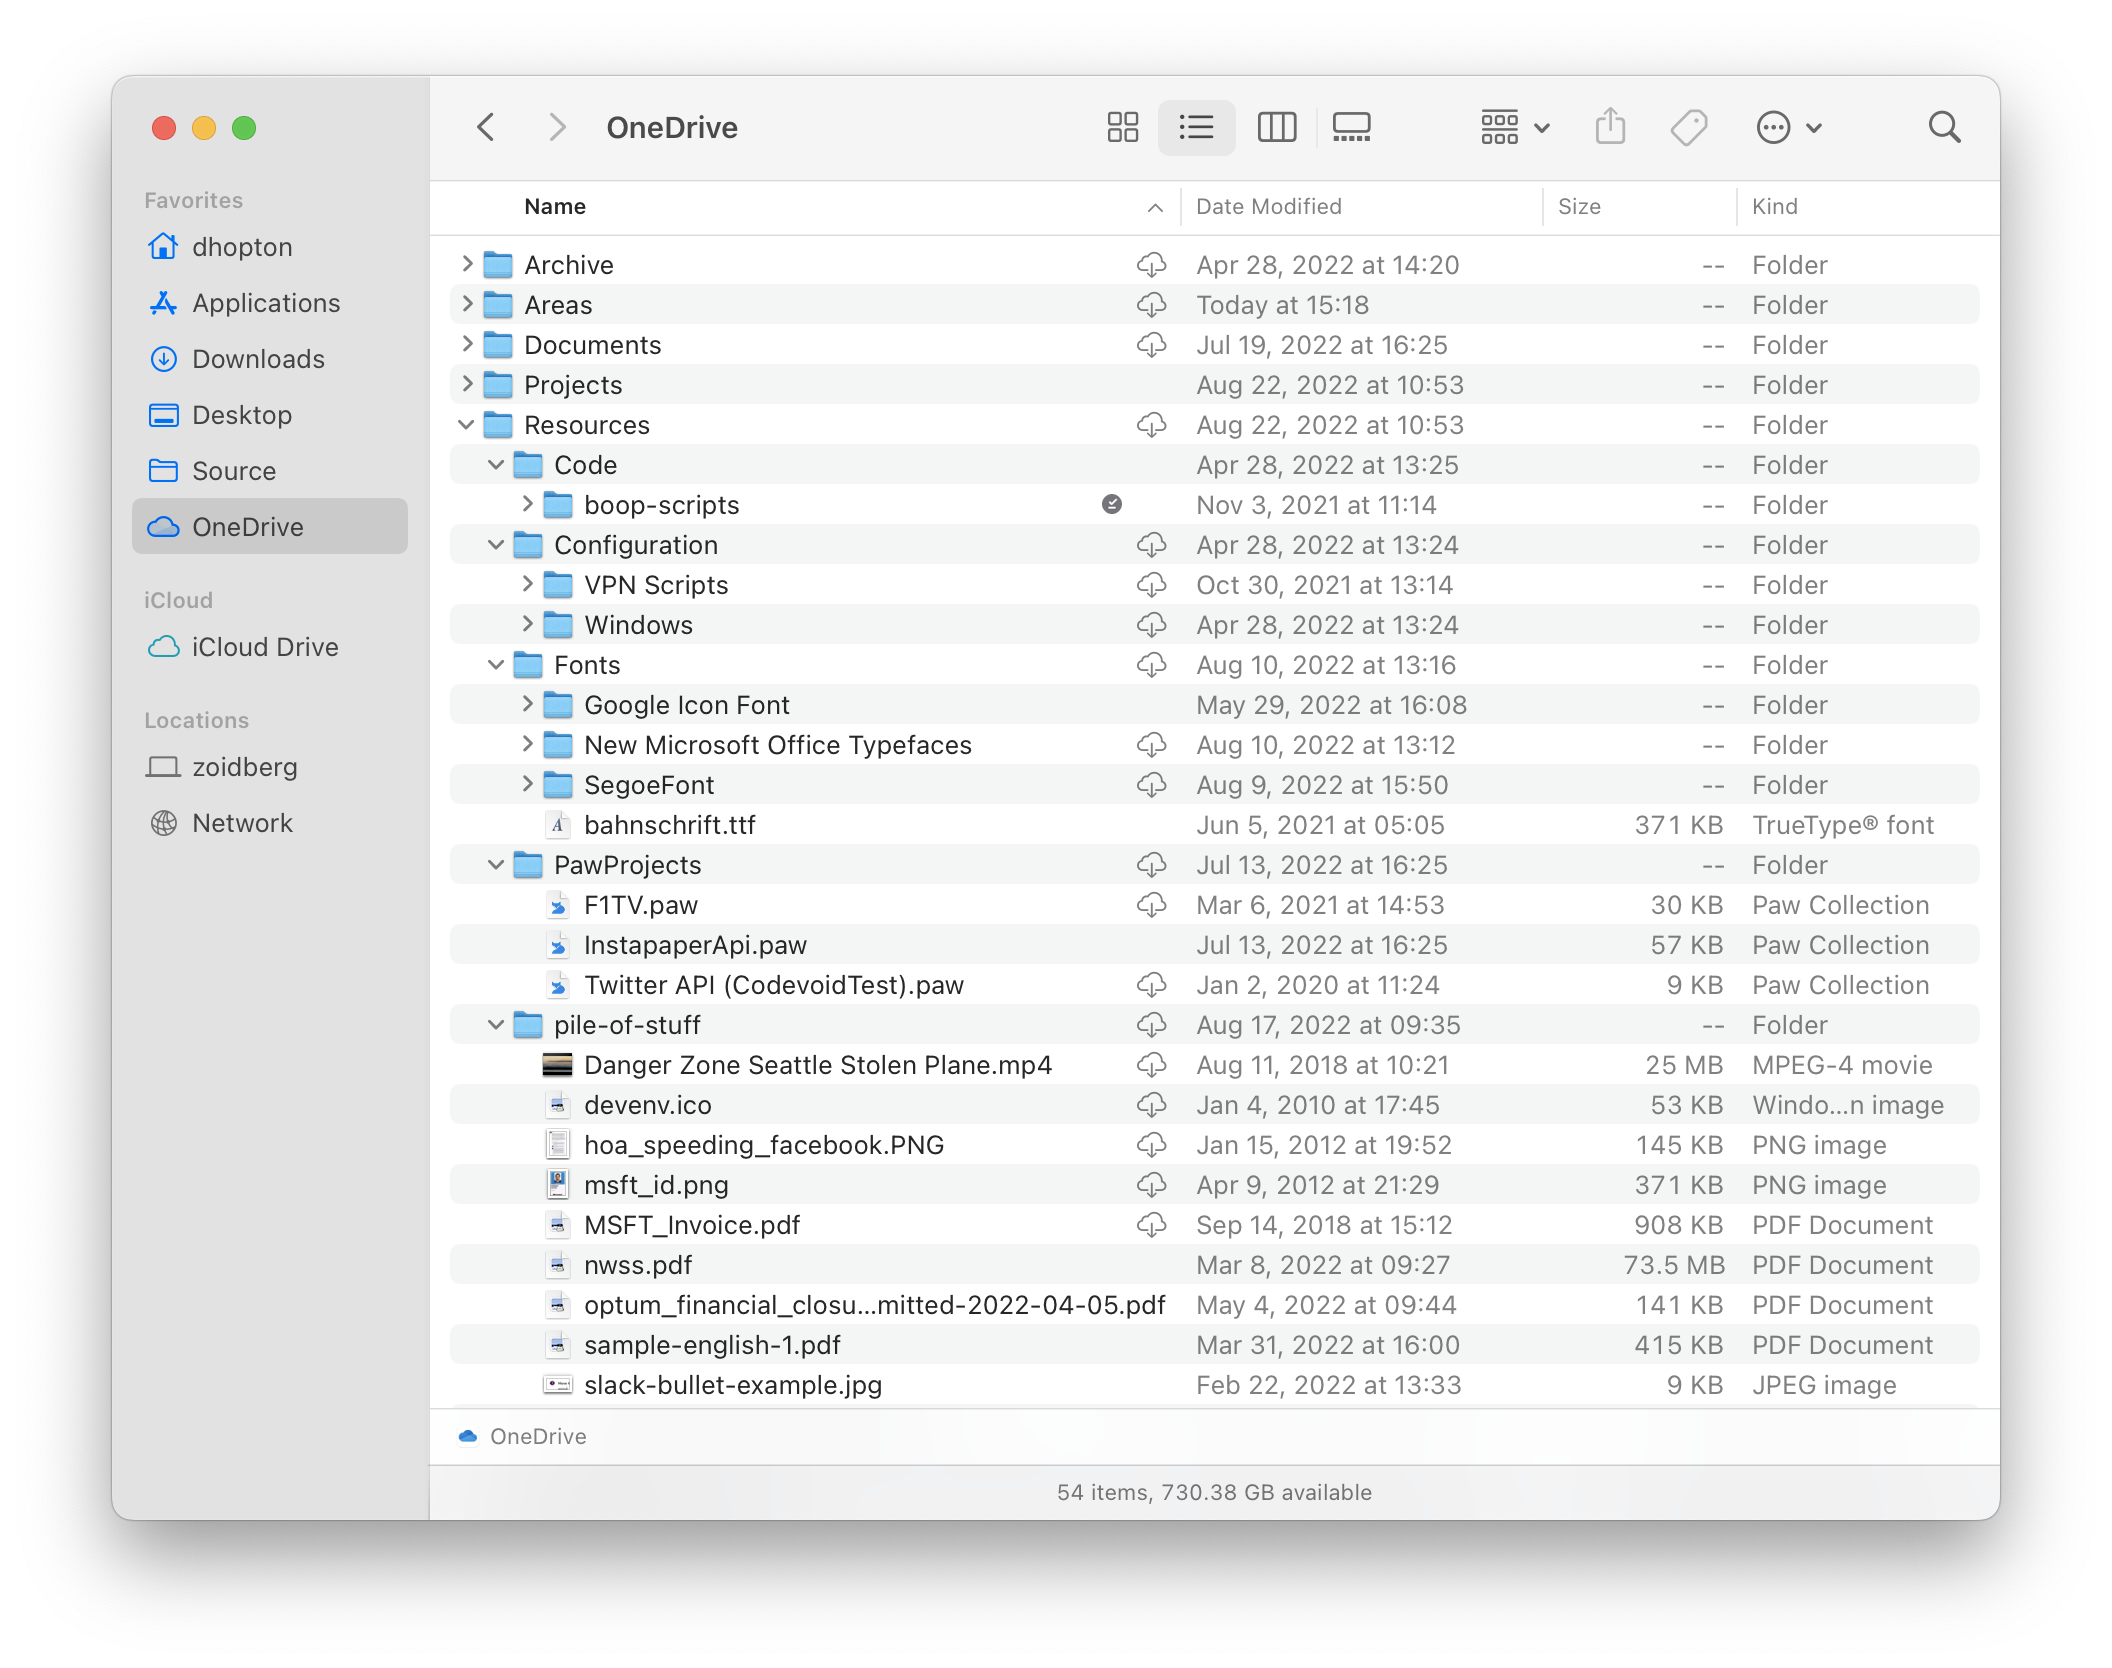 Structured list of files in macOS finder